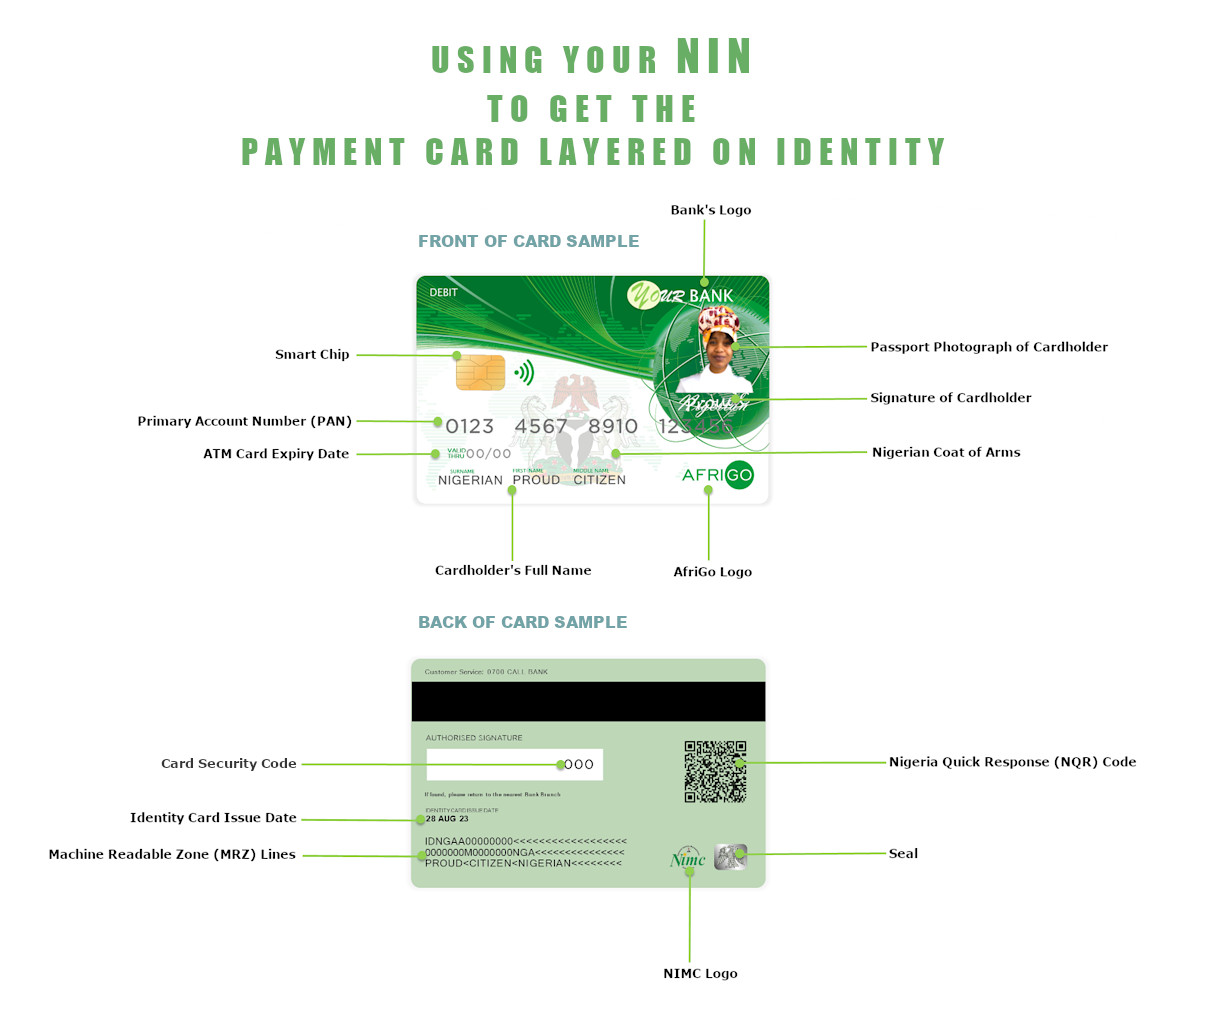 Payment Card layered on Identity